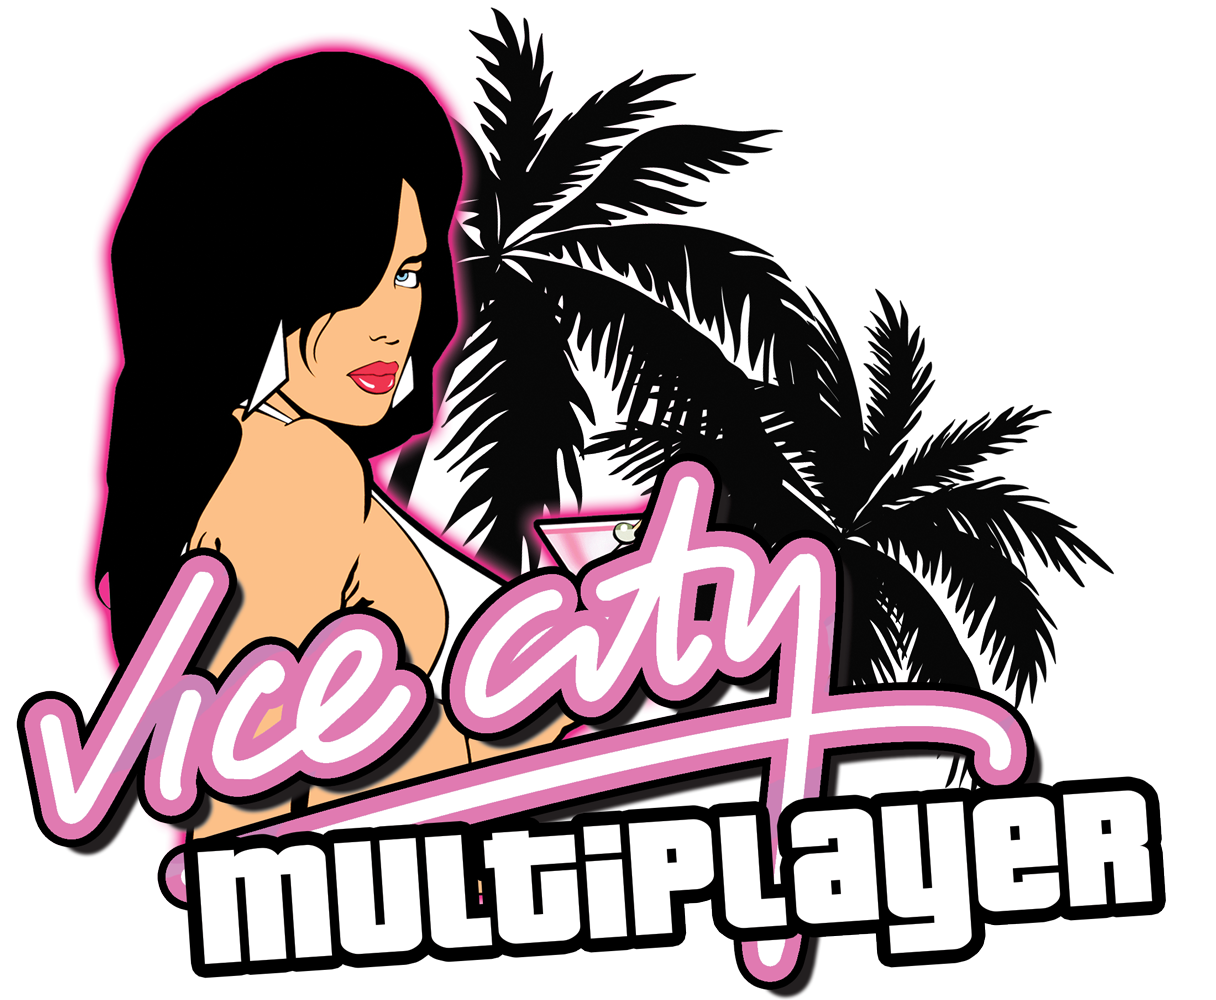 Vice City Multiplayer